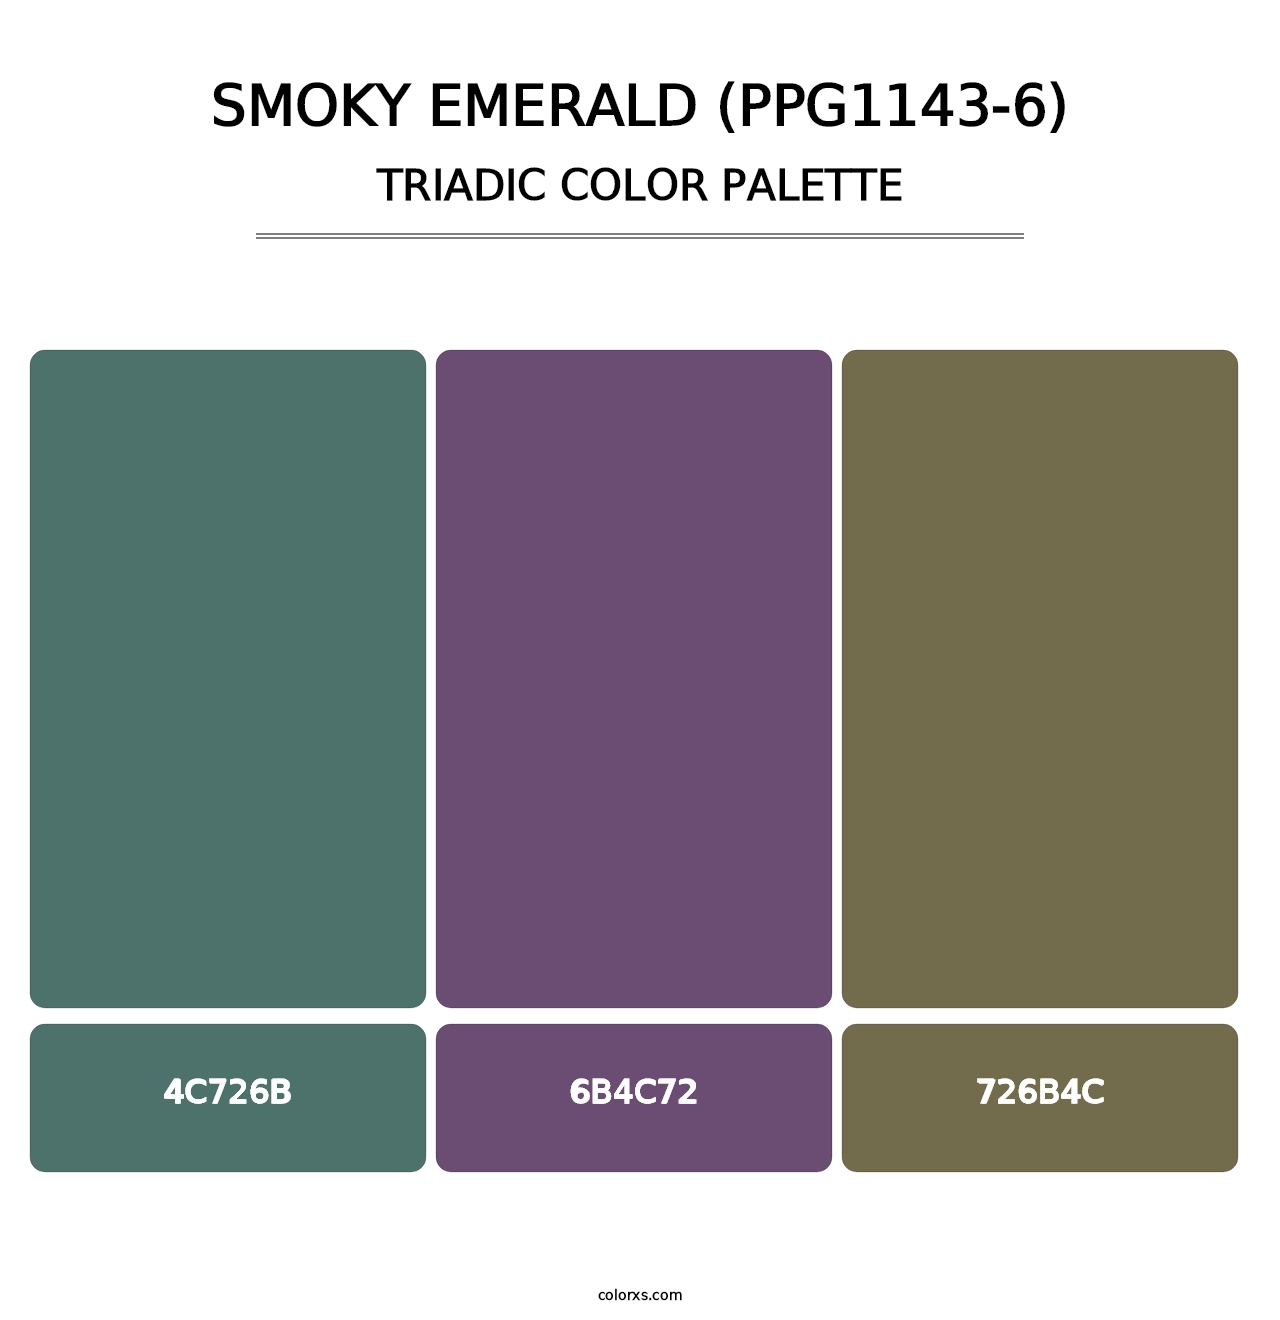 Smoky Emerald (PPG1143-6) - Triadic Color Palette